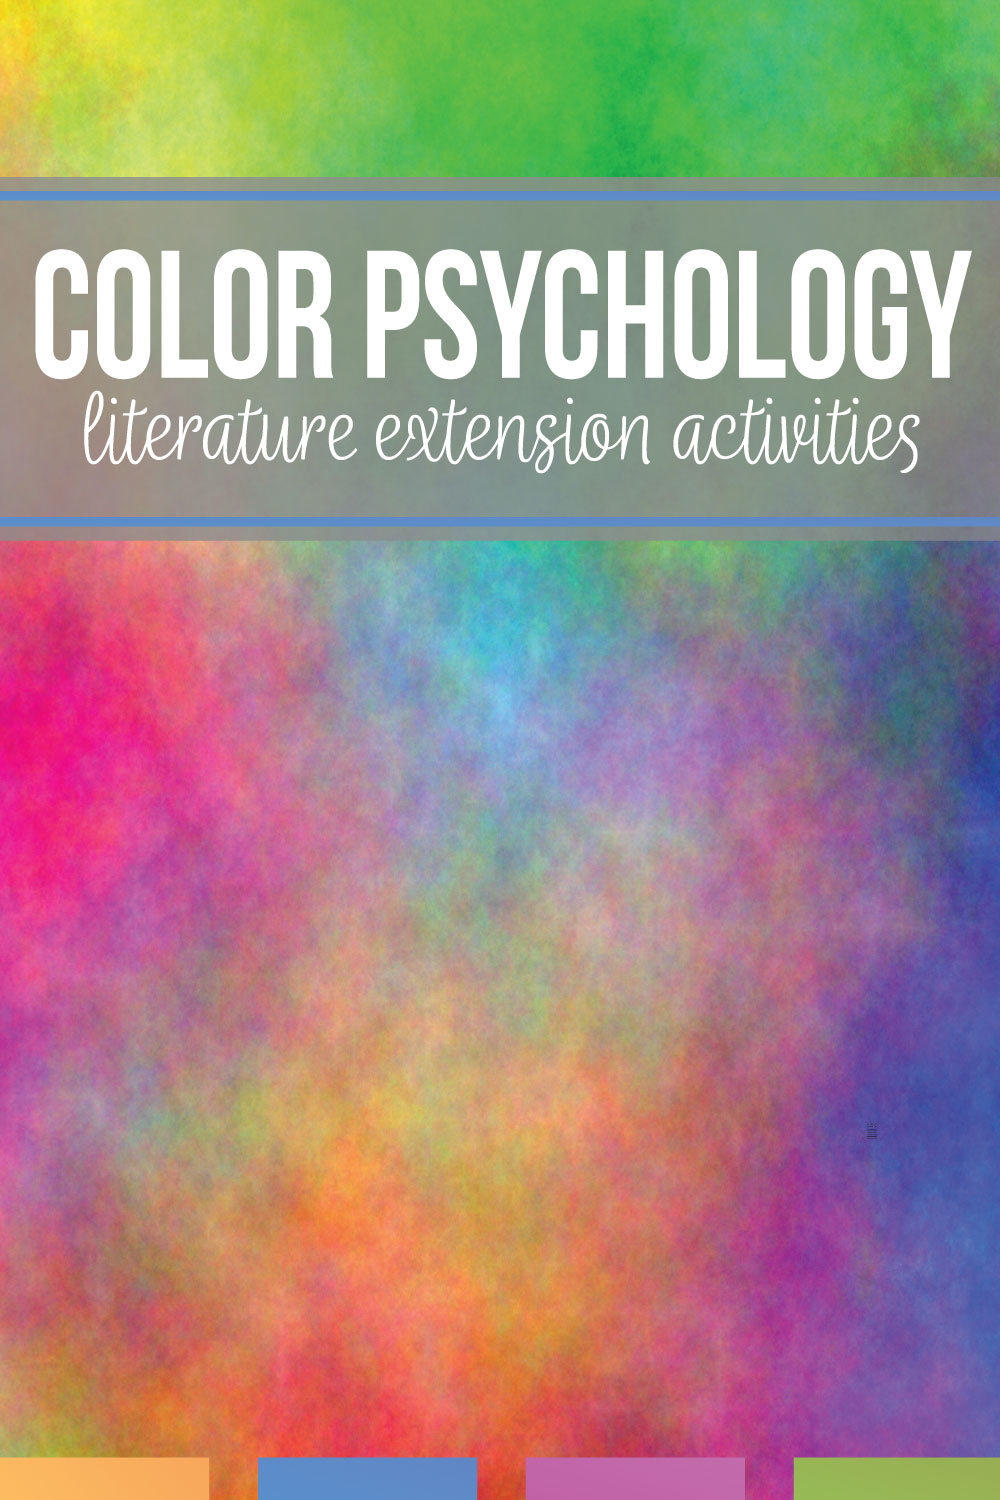 Teaching color psychology in literature is a great literature extension activity. Students have prior knowledge of the concept, and high school English teachers can meet literature standards through the literature discussions. 